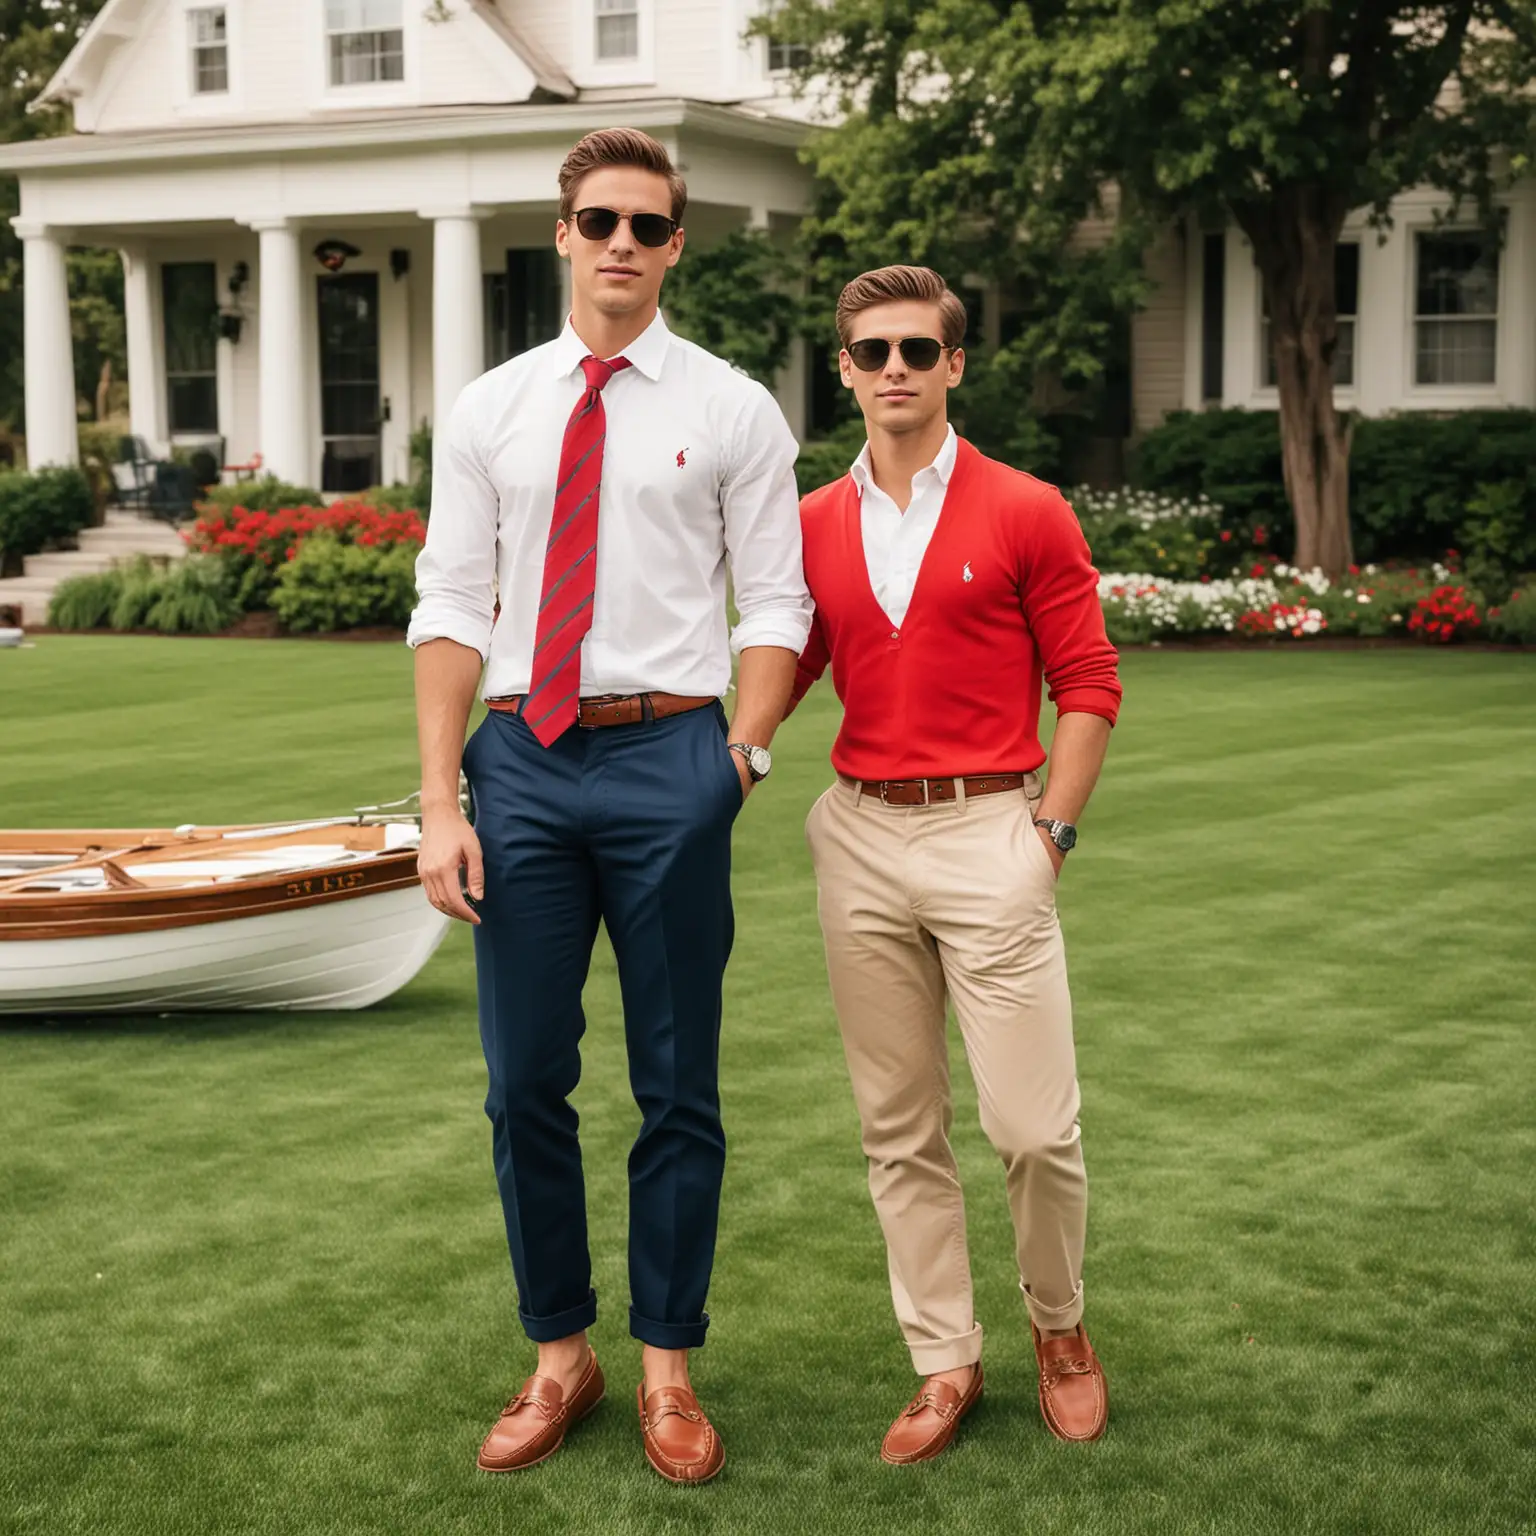 Young gorgeous man, preppy style, Ralph lauren style, aviator sunglasses, red tie, boat shoes, standing in front of a lawn.